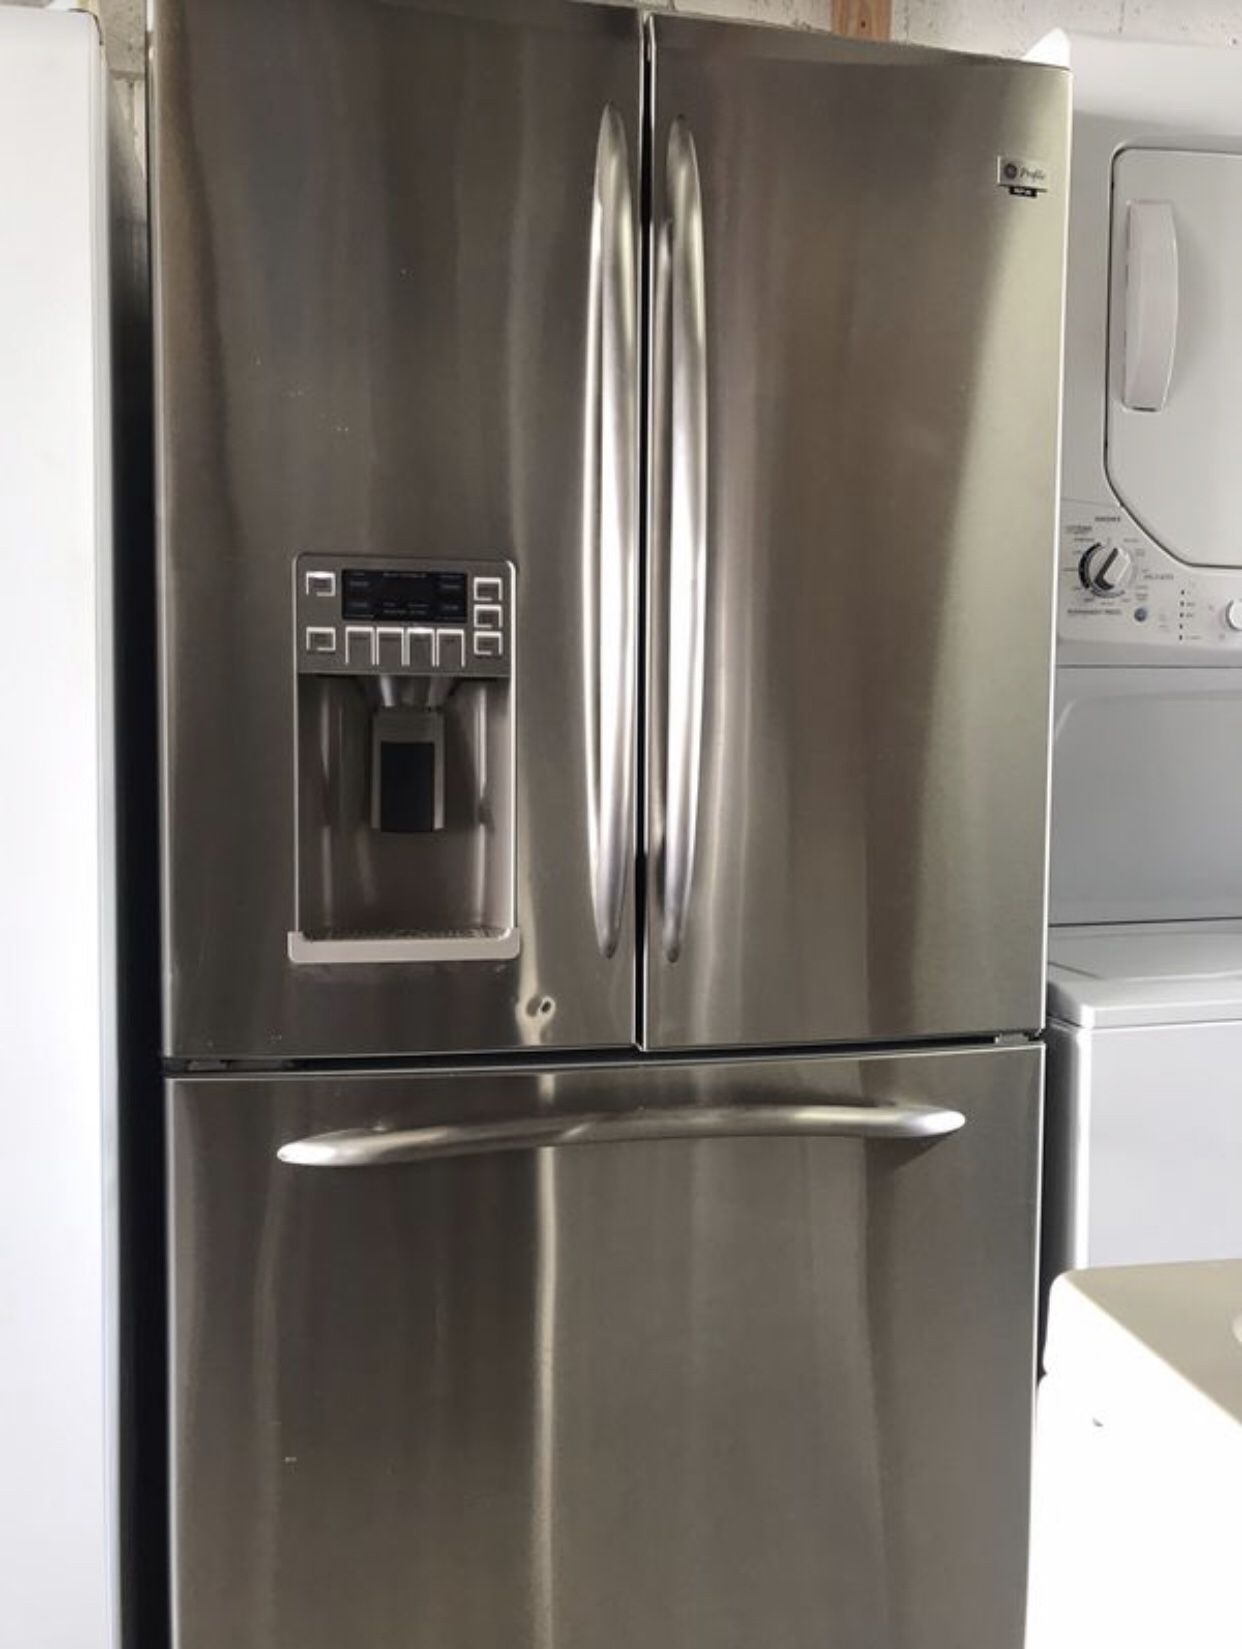 Ge stainless steel refrigerator 36” wide working perfect and 4 months warranty. No ice maker. Immediate delivery service available